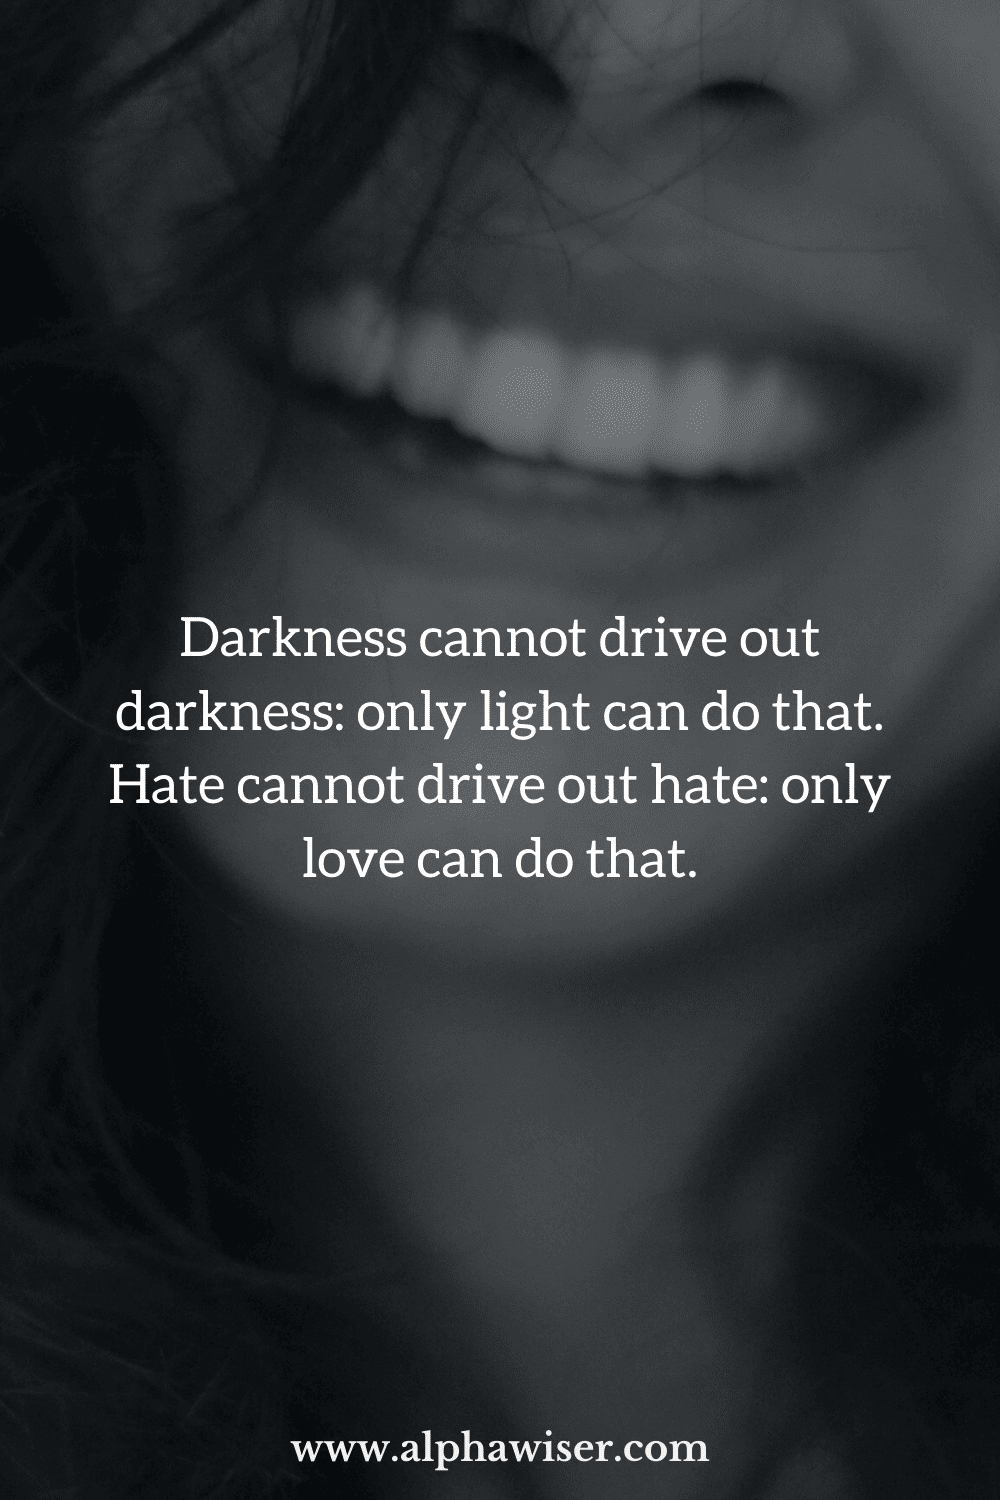 Darkness cannot drive out darkness_ only light can do that. Hate cannot drive out hate_ only love can do that.